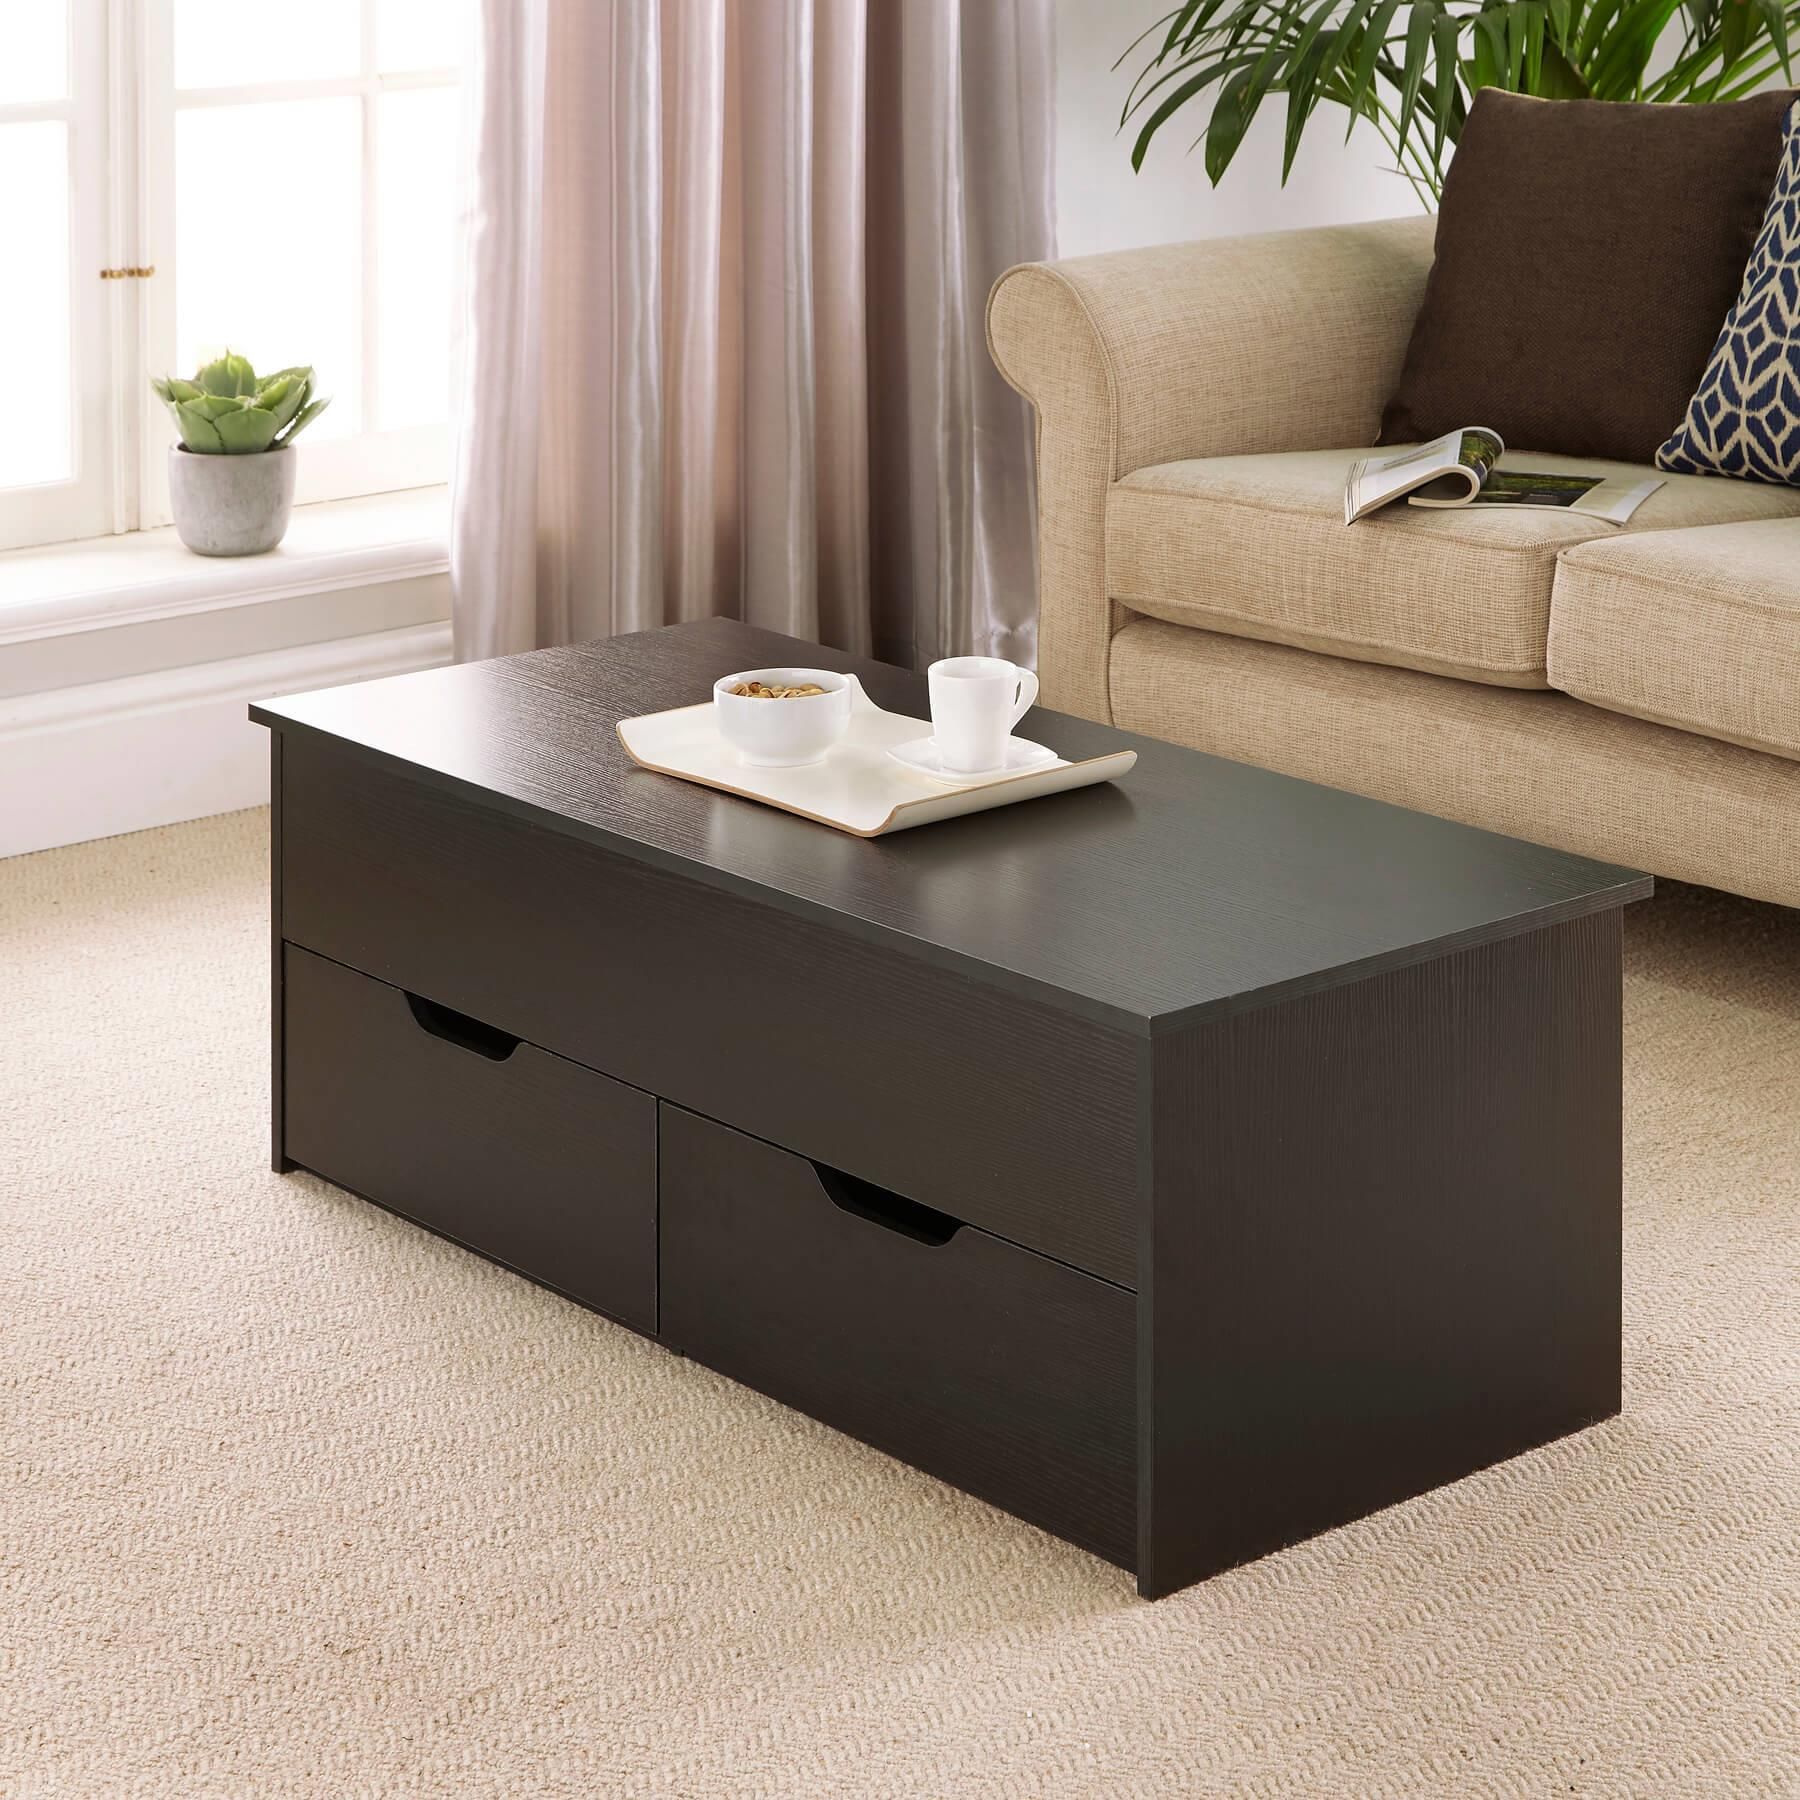 Black Wooden Coffee Table With Lift Up Top And 2 Large Storage Drawers Inside Lift Top Coffee Tables With Storage Drawers (View 3 of 20)